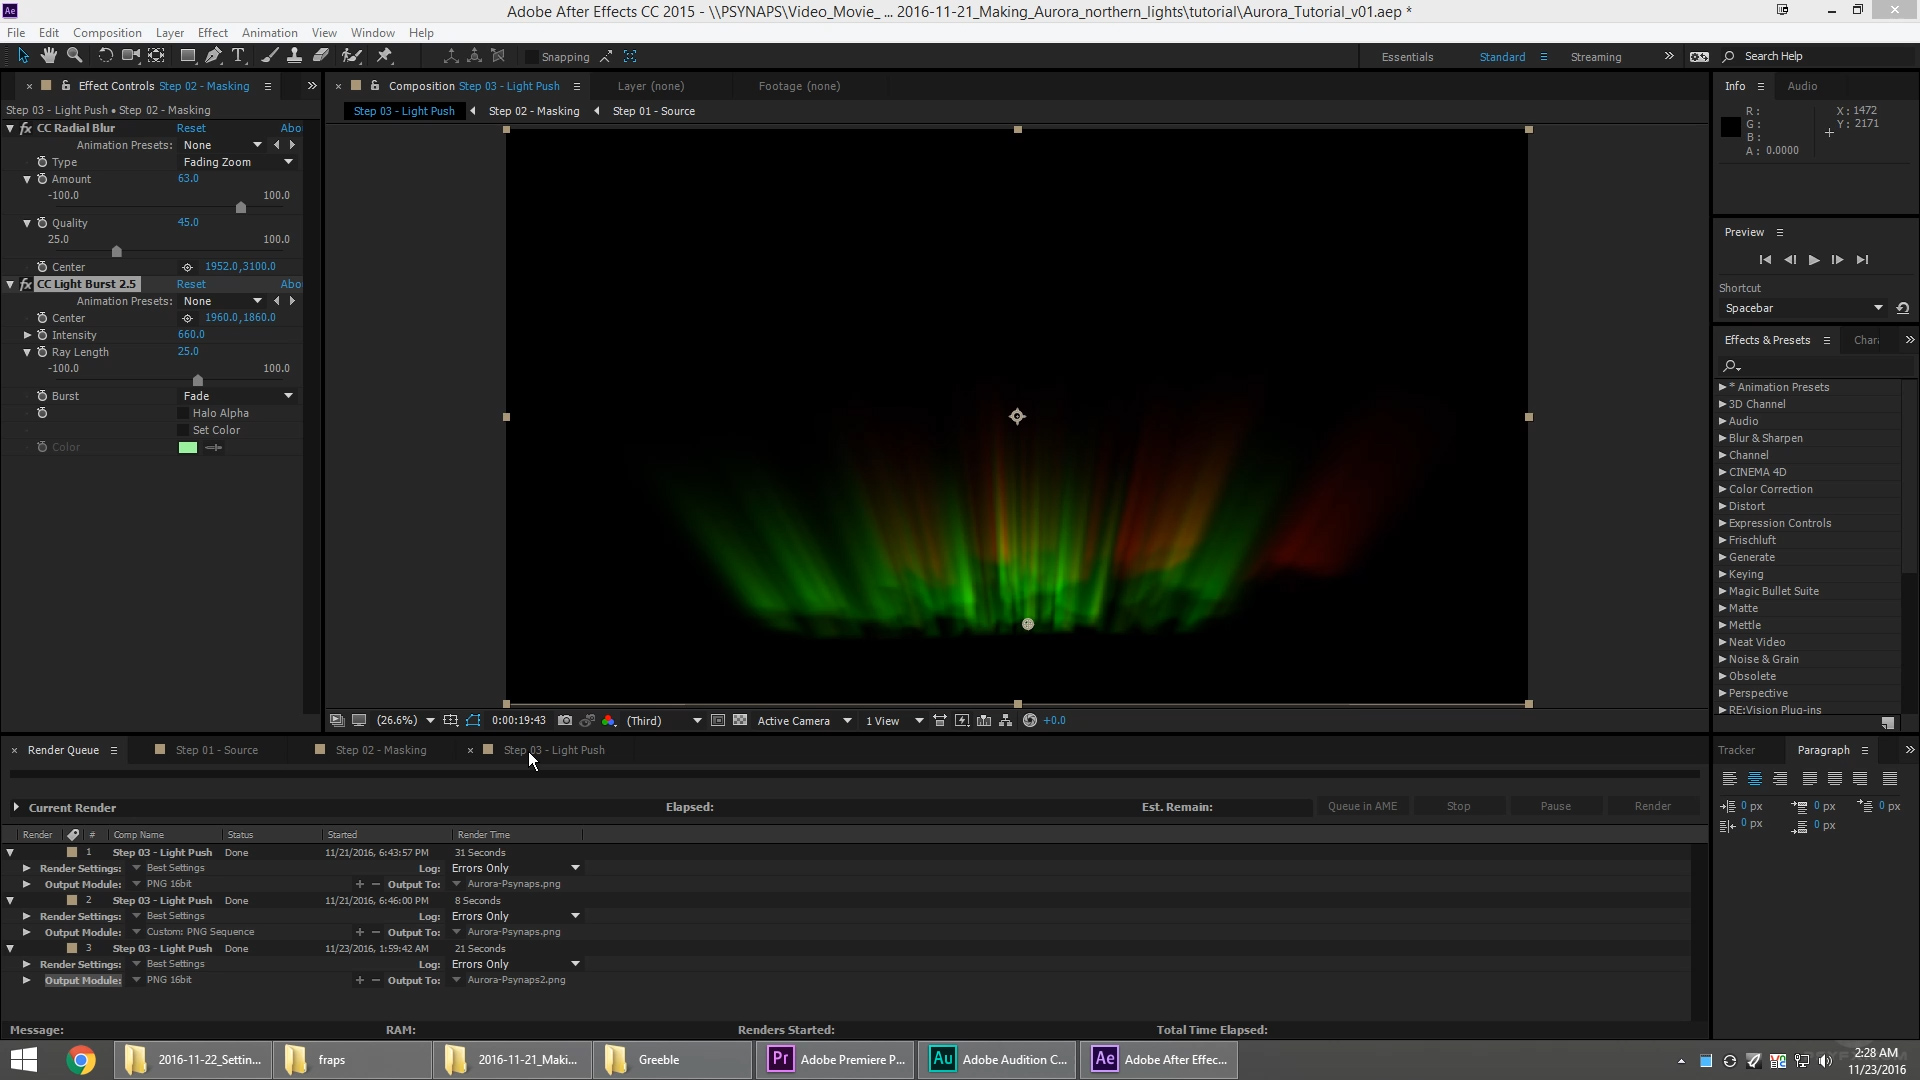 Create an Aurora (Northern Lights) in After Effects (Download Project)